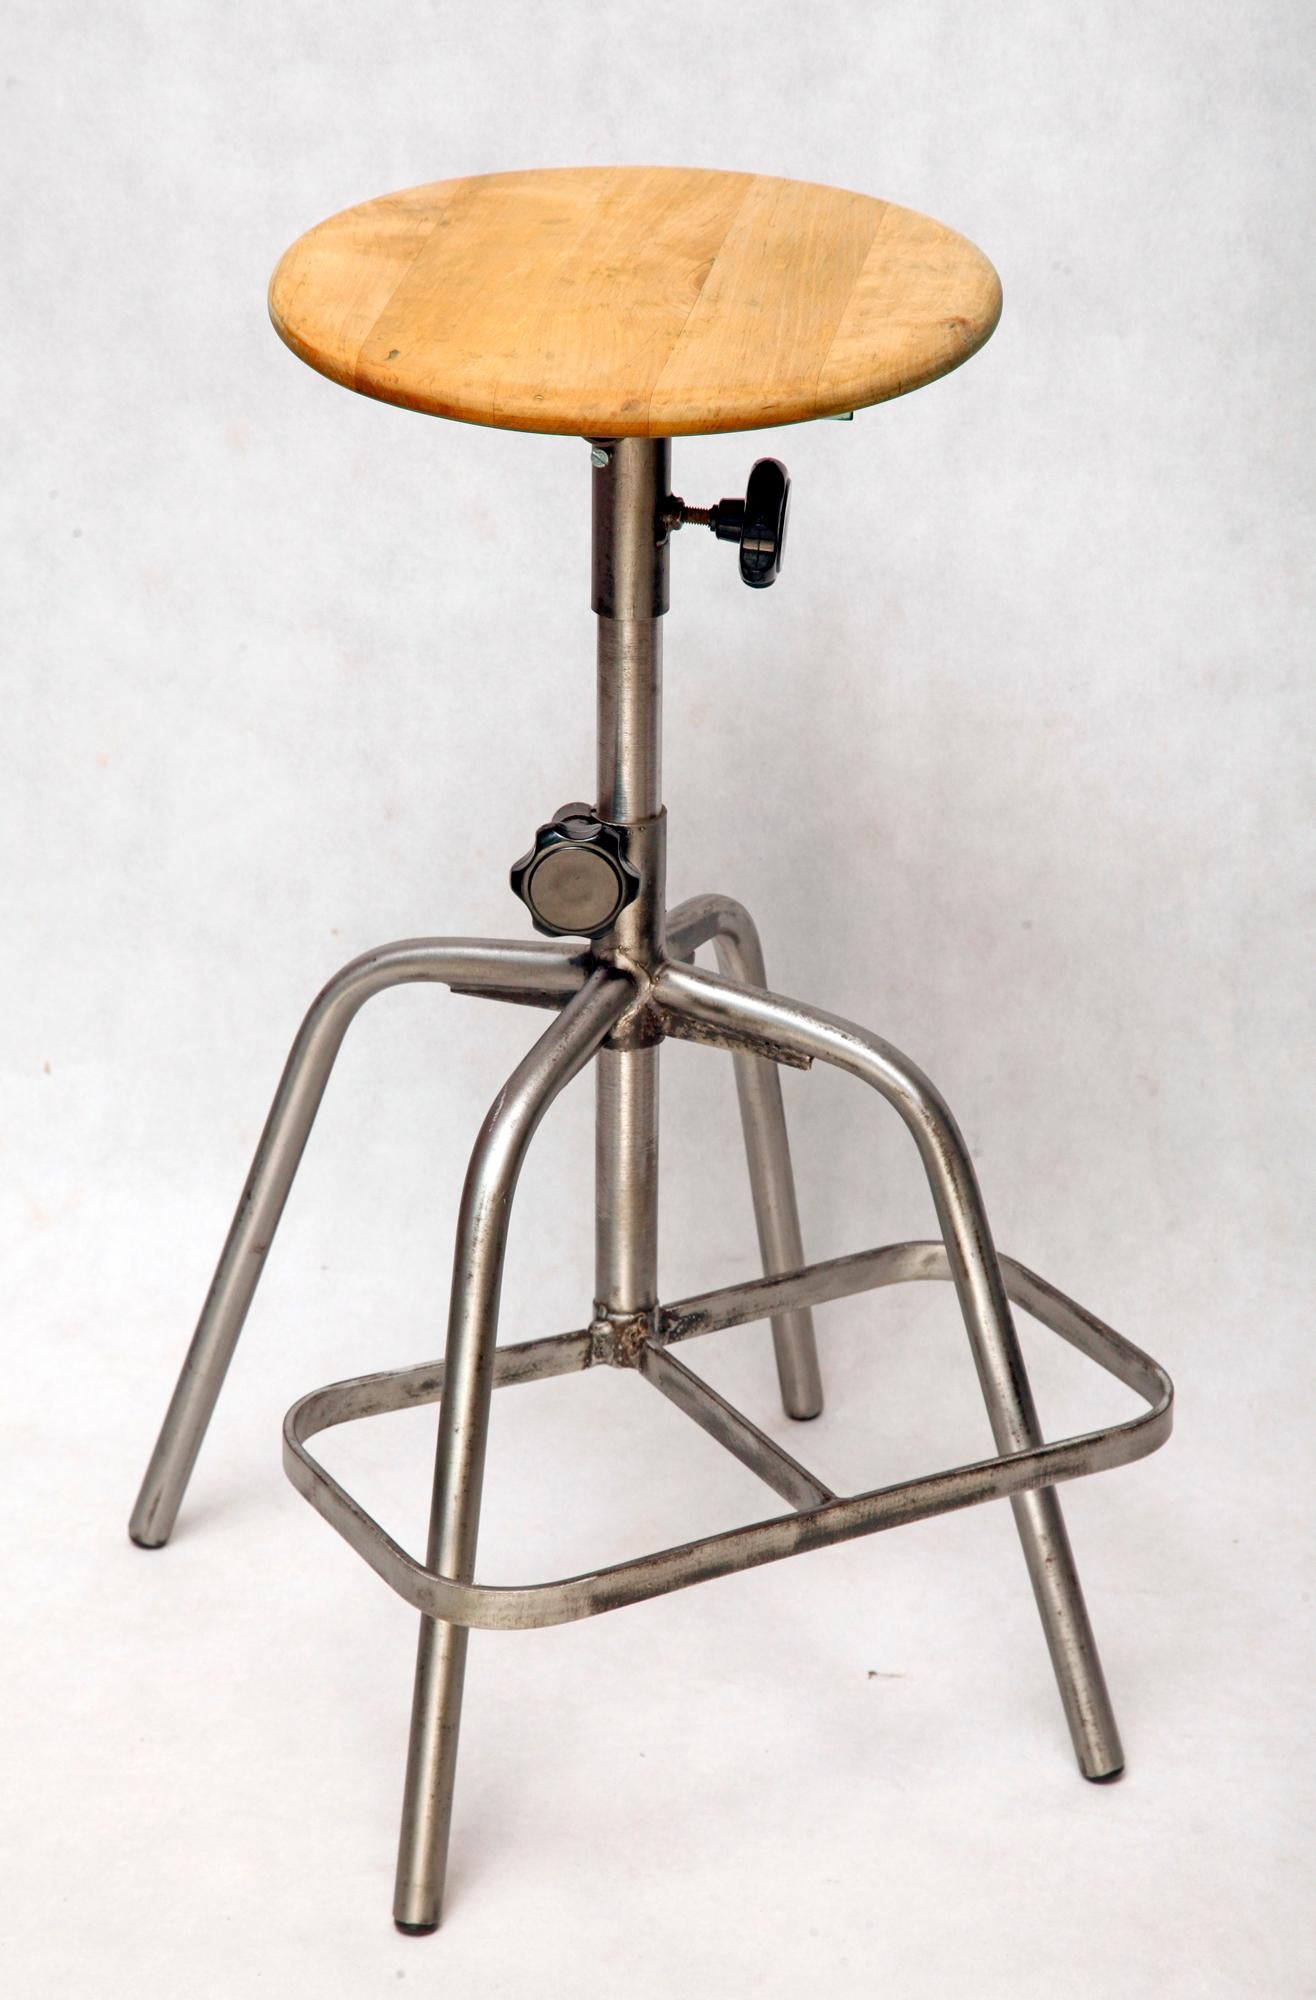 The metal stool was used in workshops in Poland in the 1970s. The whole construction is metal (steel), only the seat is wooden. Stool has adjustable seat height in the range of 59-82 cm. All you need to do is unscrew the black plastic knob. An